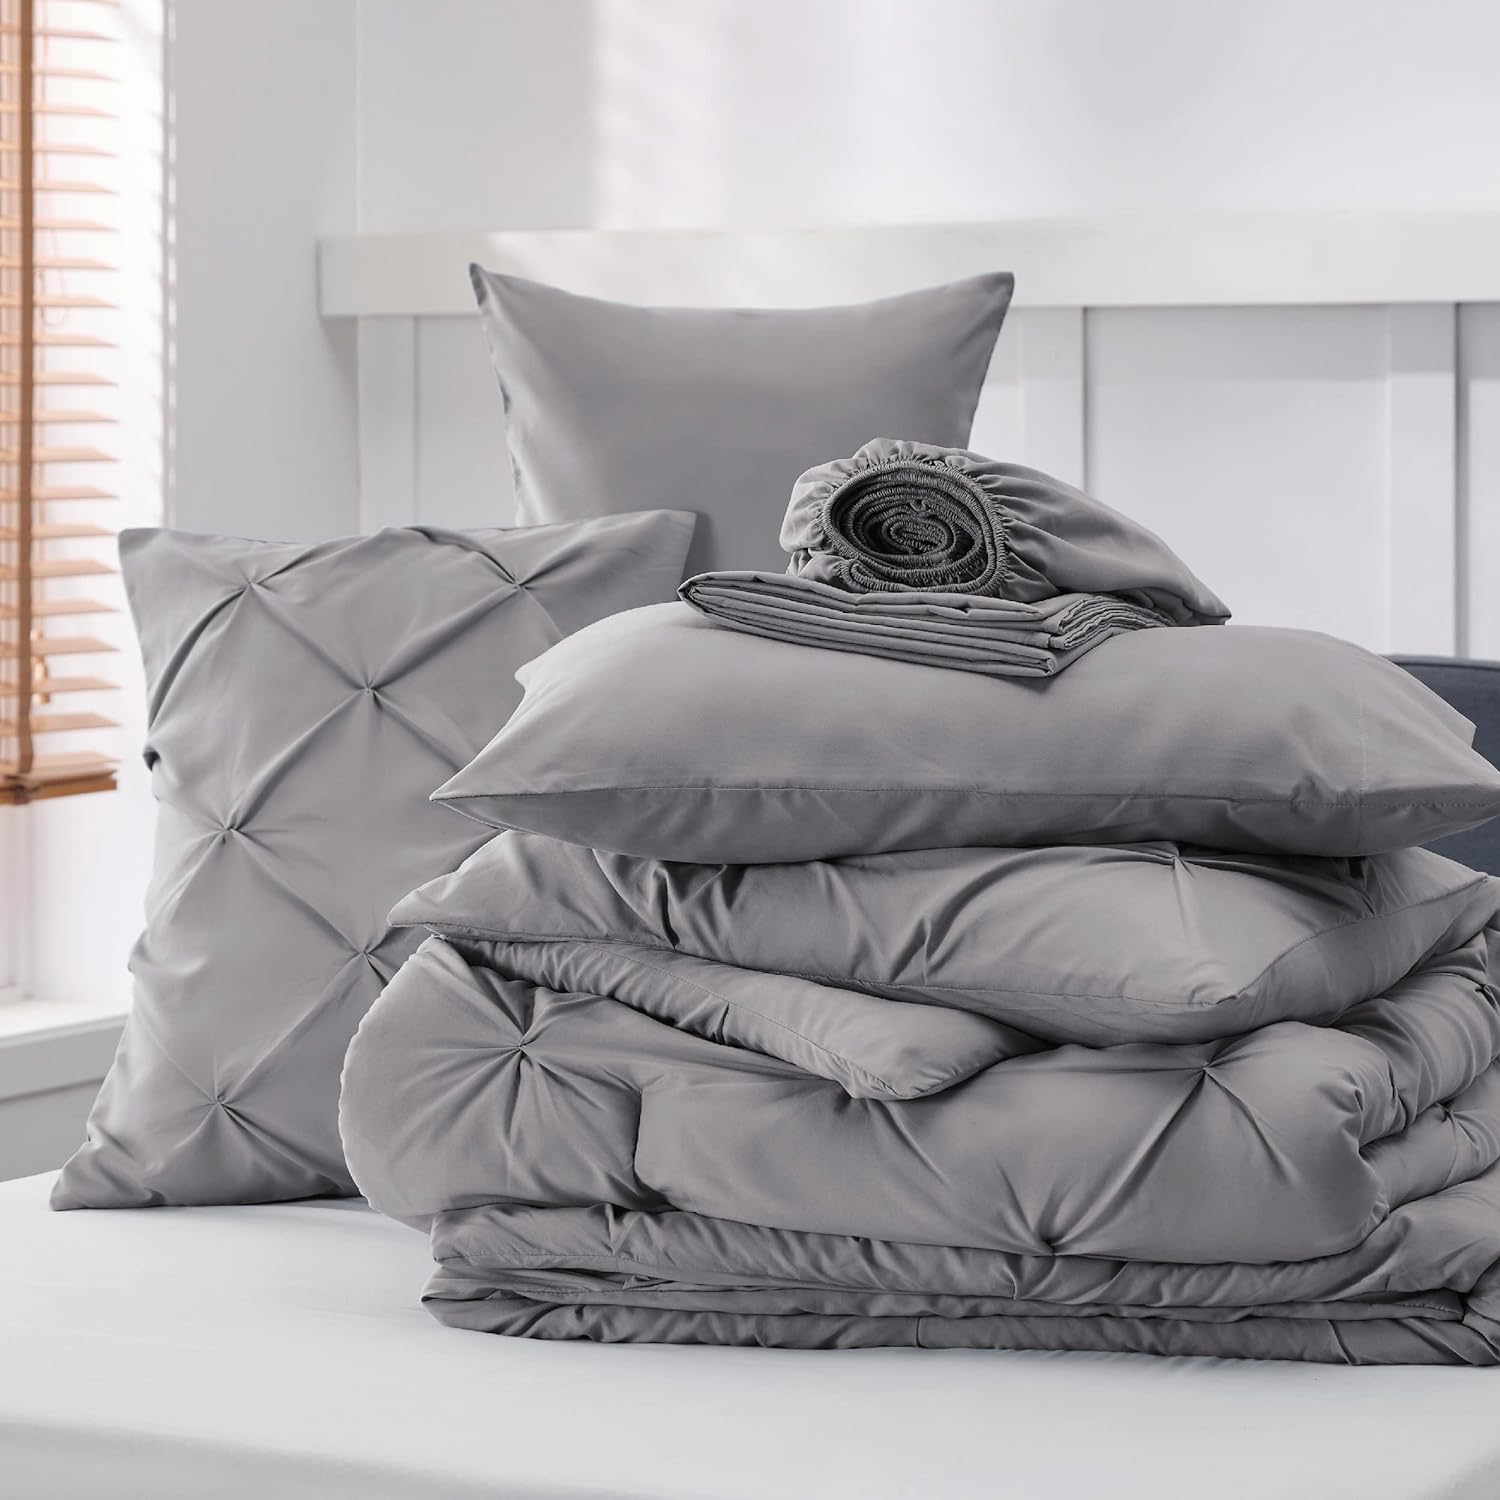 https://bigbigmart.com/wp-content/uploads/2023/09/Bedsure-Queen-Comforter-Set-7-Pieces-Comforters-Queen-Size-Grey-Pintuck-Bedding-Sets-Queen-for-All-Season-Bed-in-a-Bag-with-Flat-Sheet-and-Fitted-Sheet-Pillowcases-Shams8.jpg